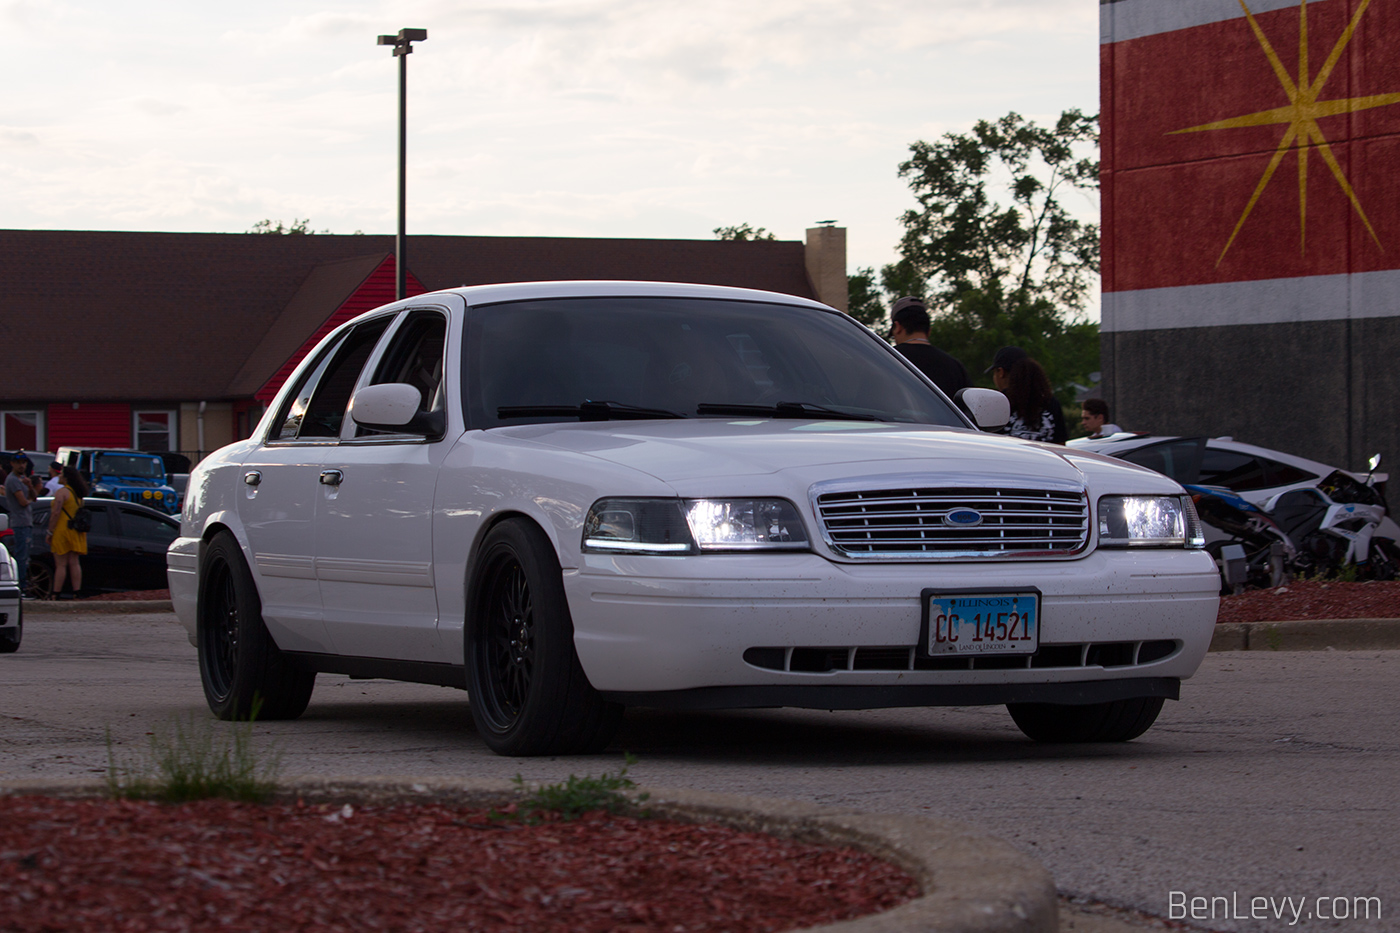 White Crown Vic at Stay iLL Sundays